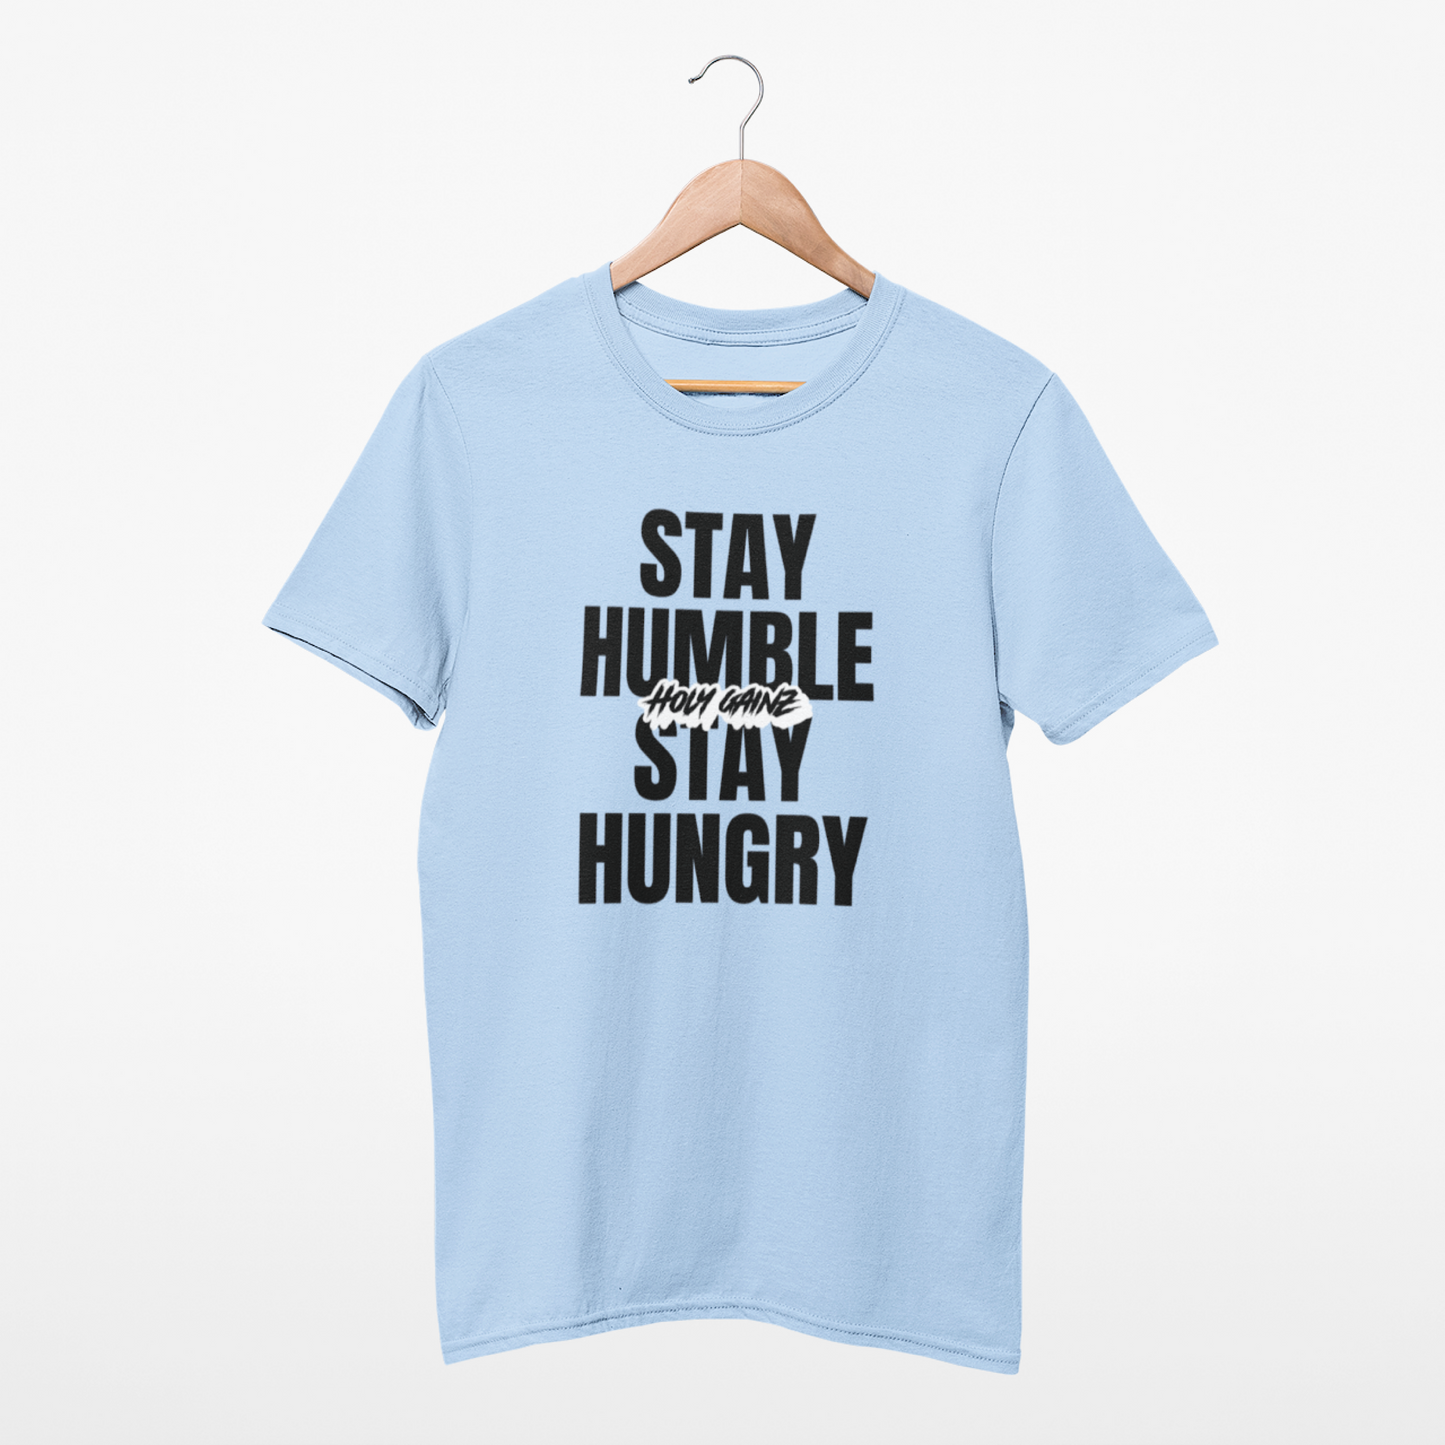 HOLY GAINZ APPAREL STAY HUMBLE STAY HUNGRY UNISEX TEE | FAITH AND FITNESS TSHIRT